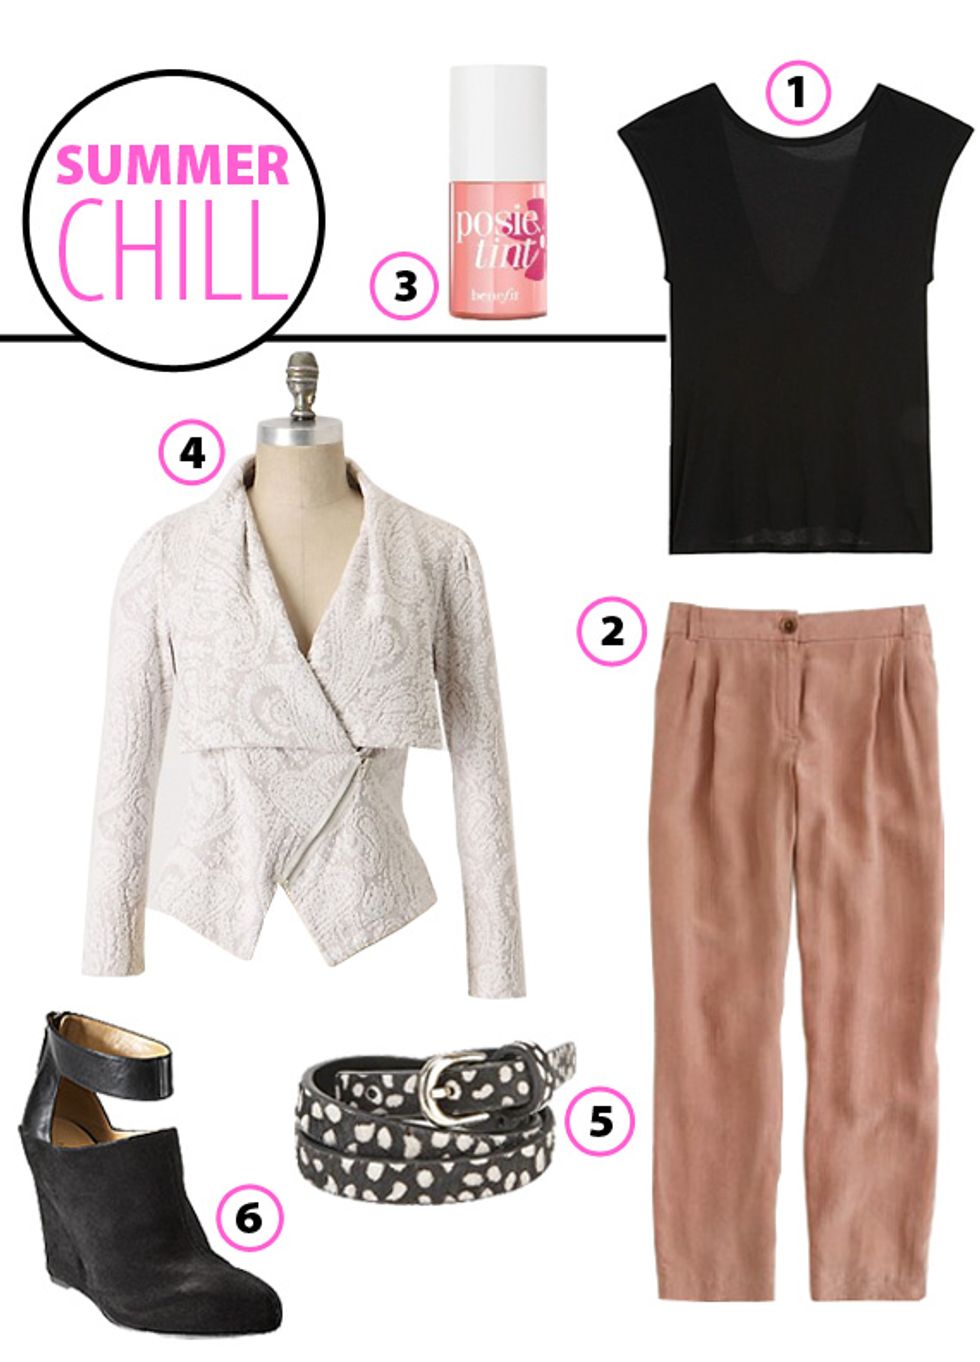 Look of the Week: Summer Chill